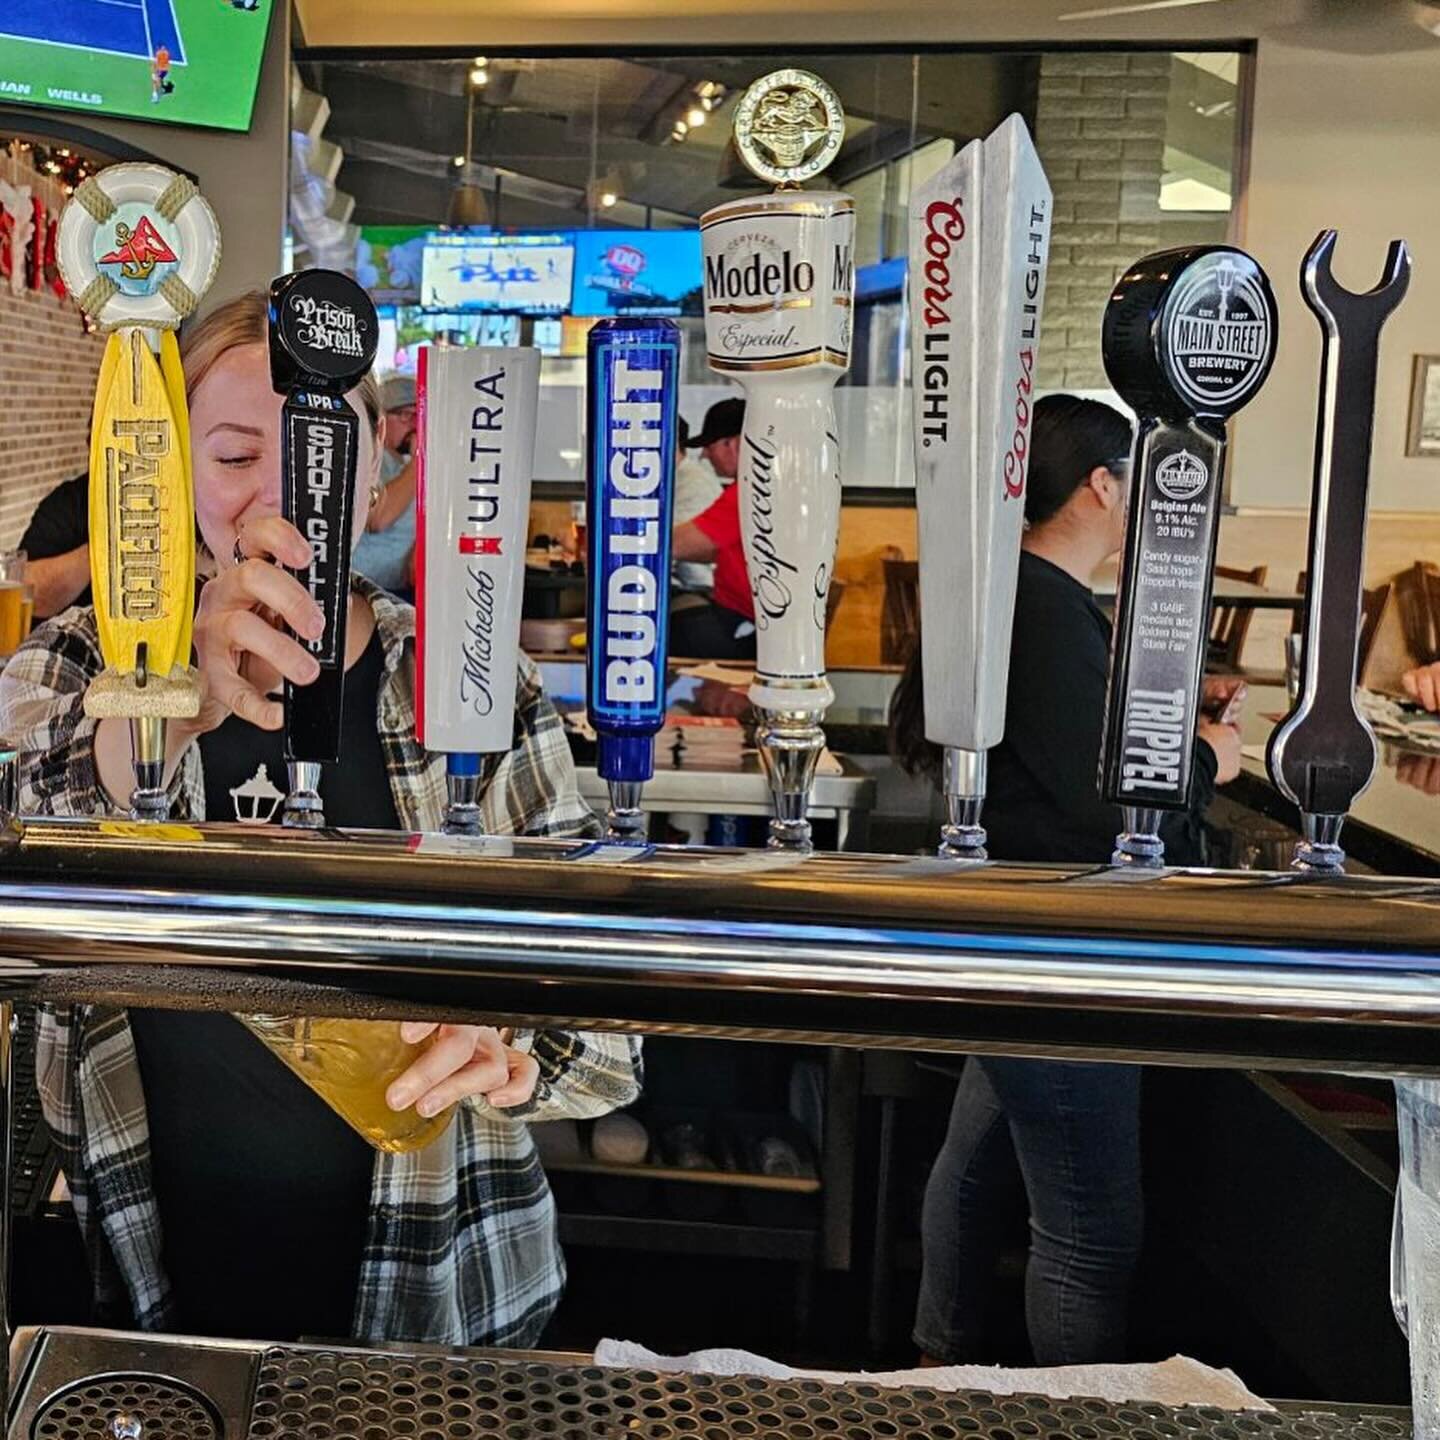 We&rsquo;re excited to announce that Shotcaller IPA is officially here! 📣🍻Our first tap handle with our newest addition to the &ldquo;Lineup&rdquo; is in and pouring at Main Street Brewery in Corona!

Who&rsquo;s ready for a taste?
🍺🍺🍺🍺🍺🍺🍺🍺